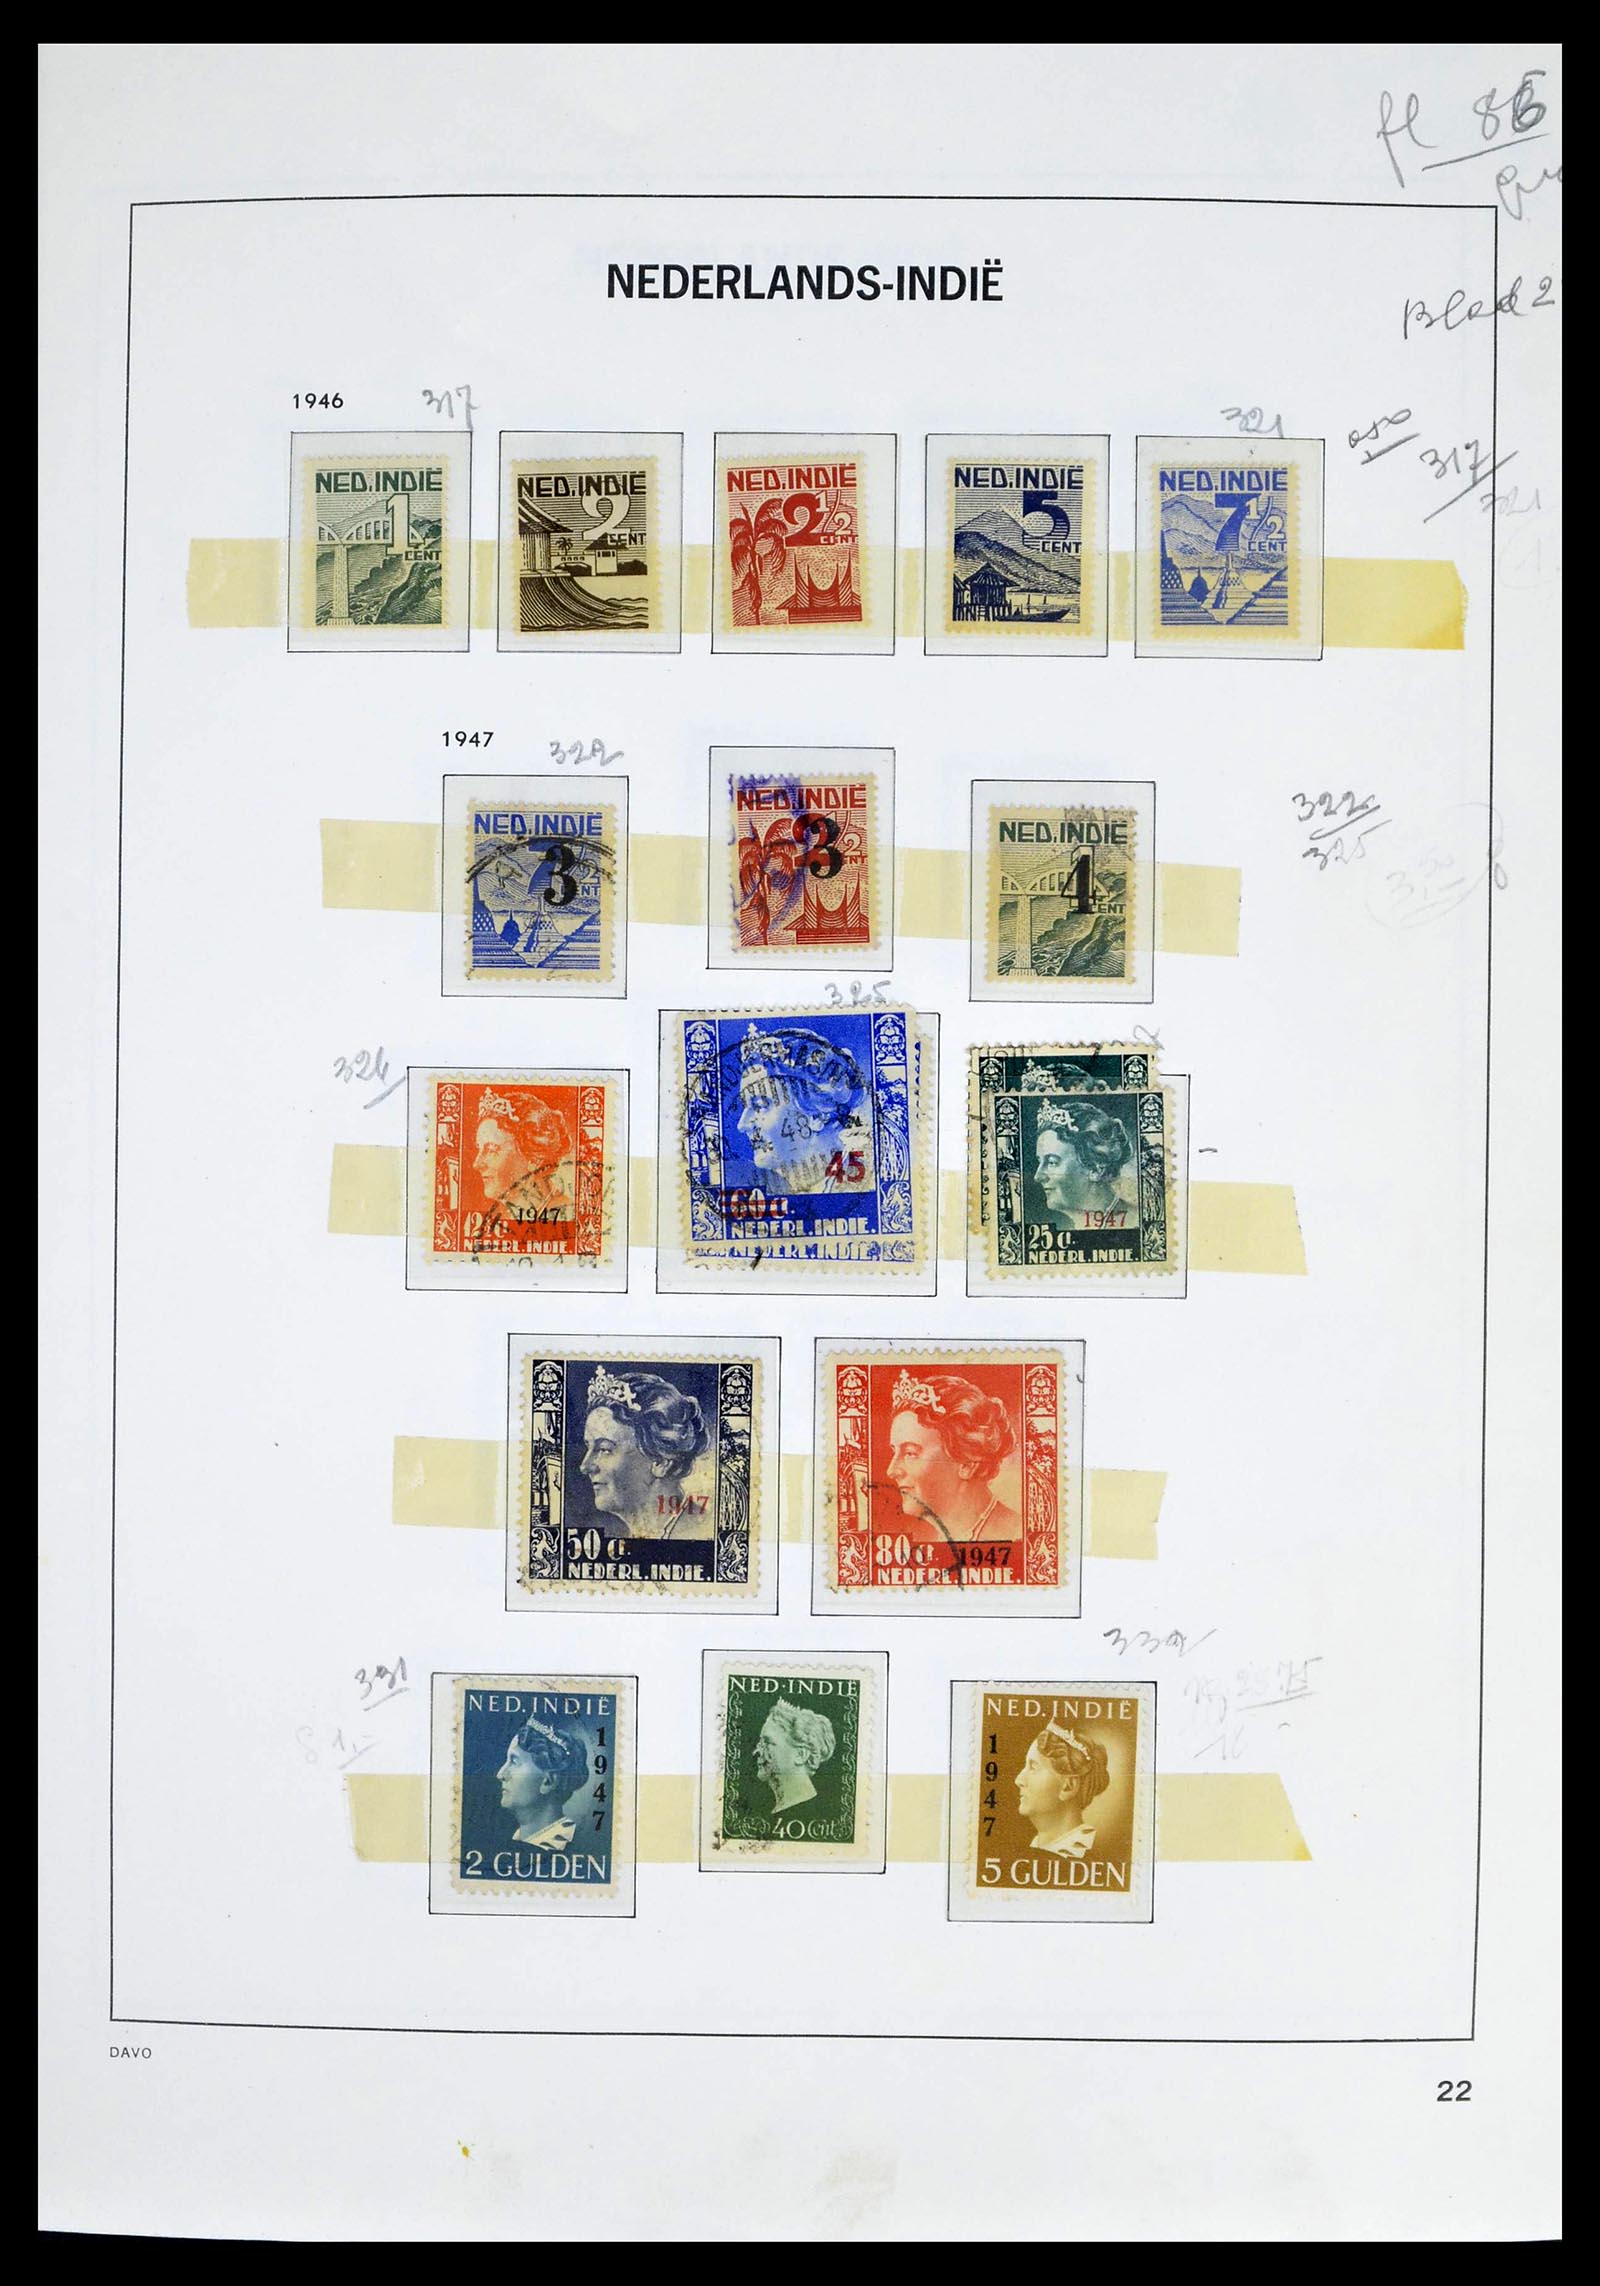 39263 0024 - Stamp collection 39263 Dutch territories 1864-1970.